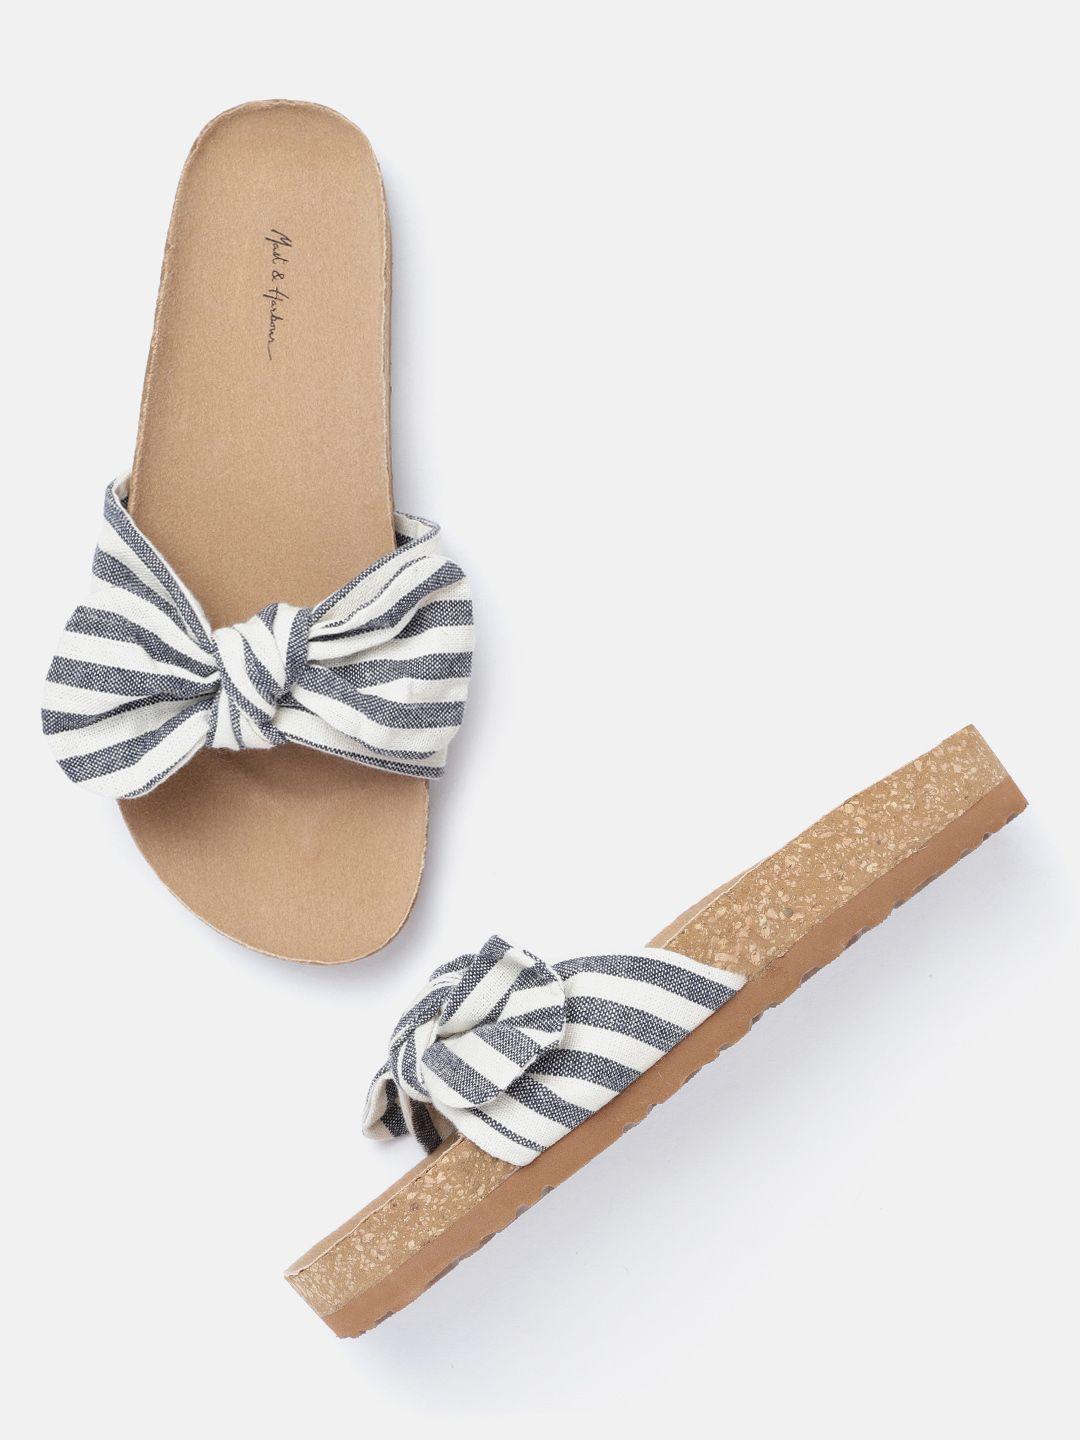 mast & harbour women off white & blue striped open toe flats with bow detail